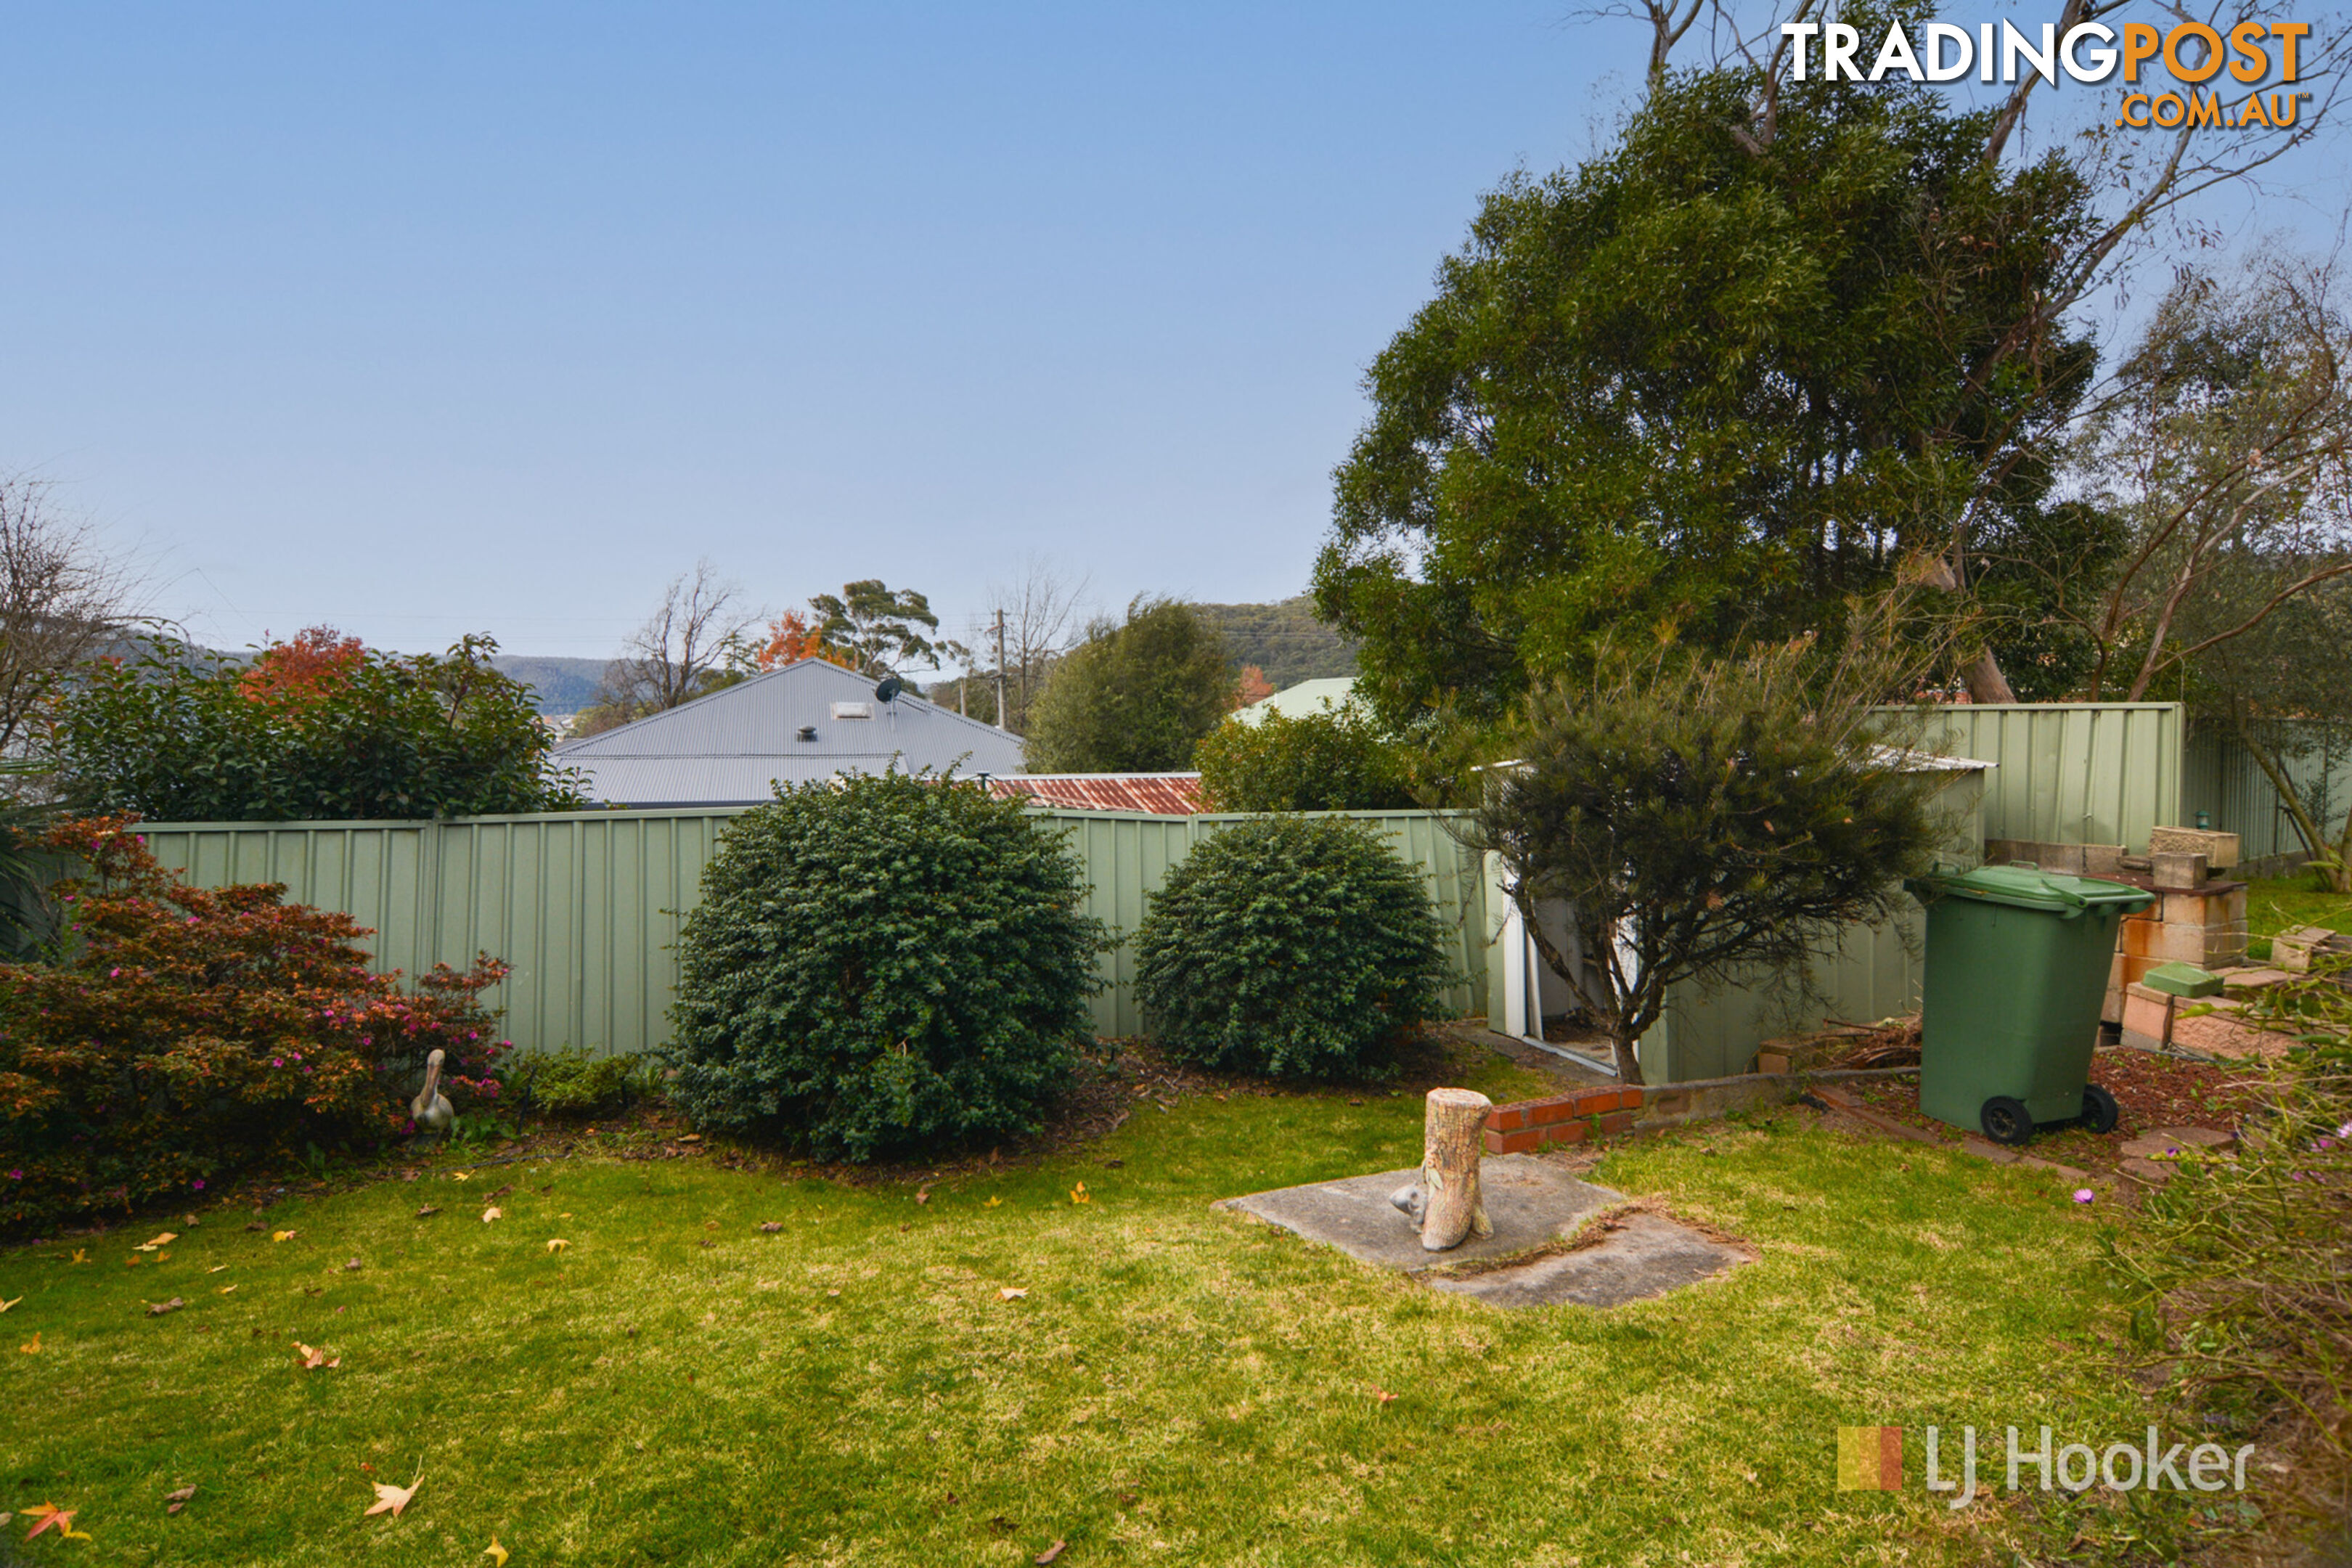 2 Hill Range Crescent LITHGOW NSW 2790